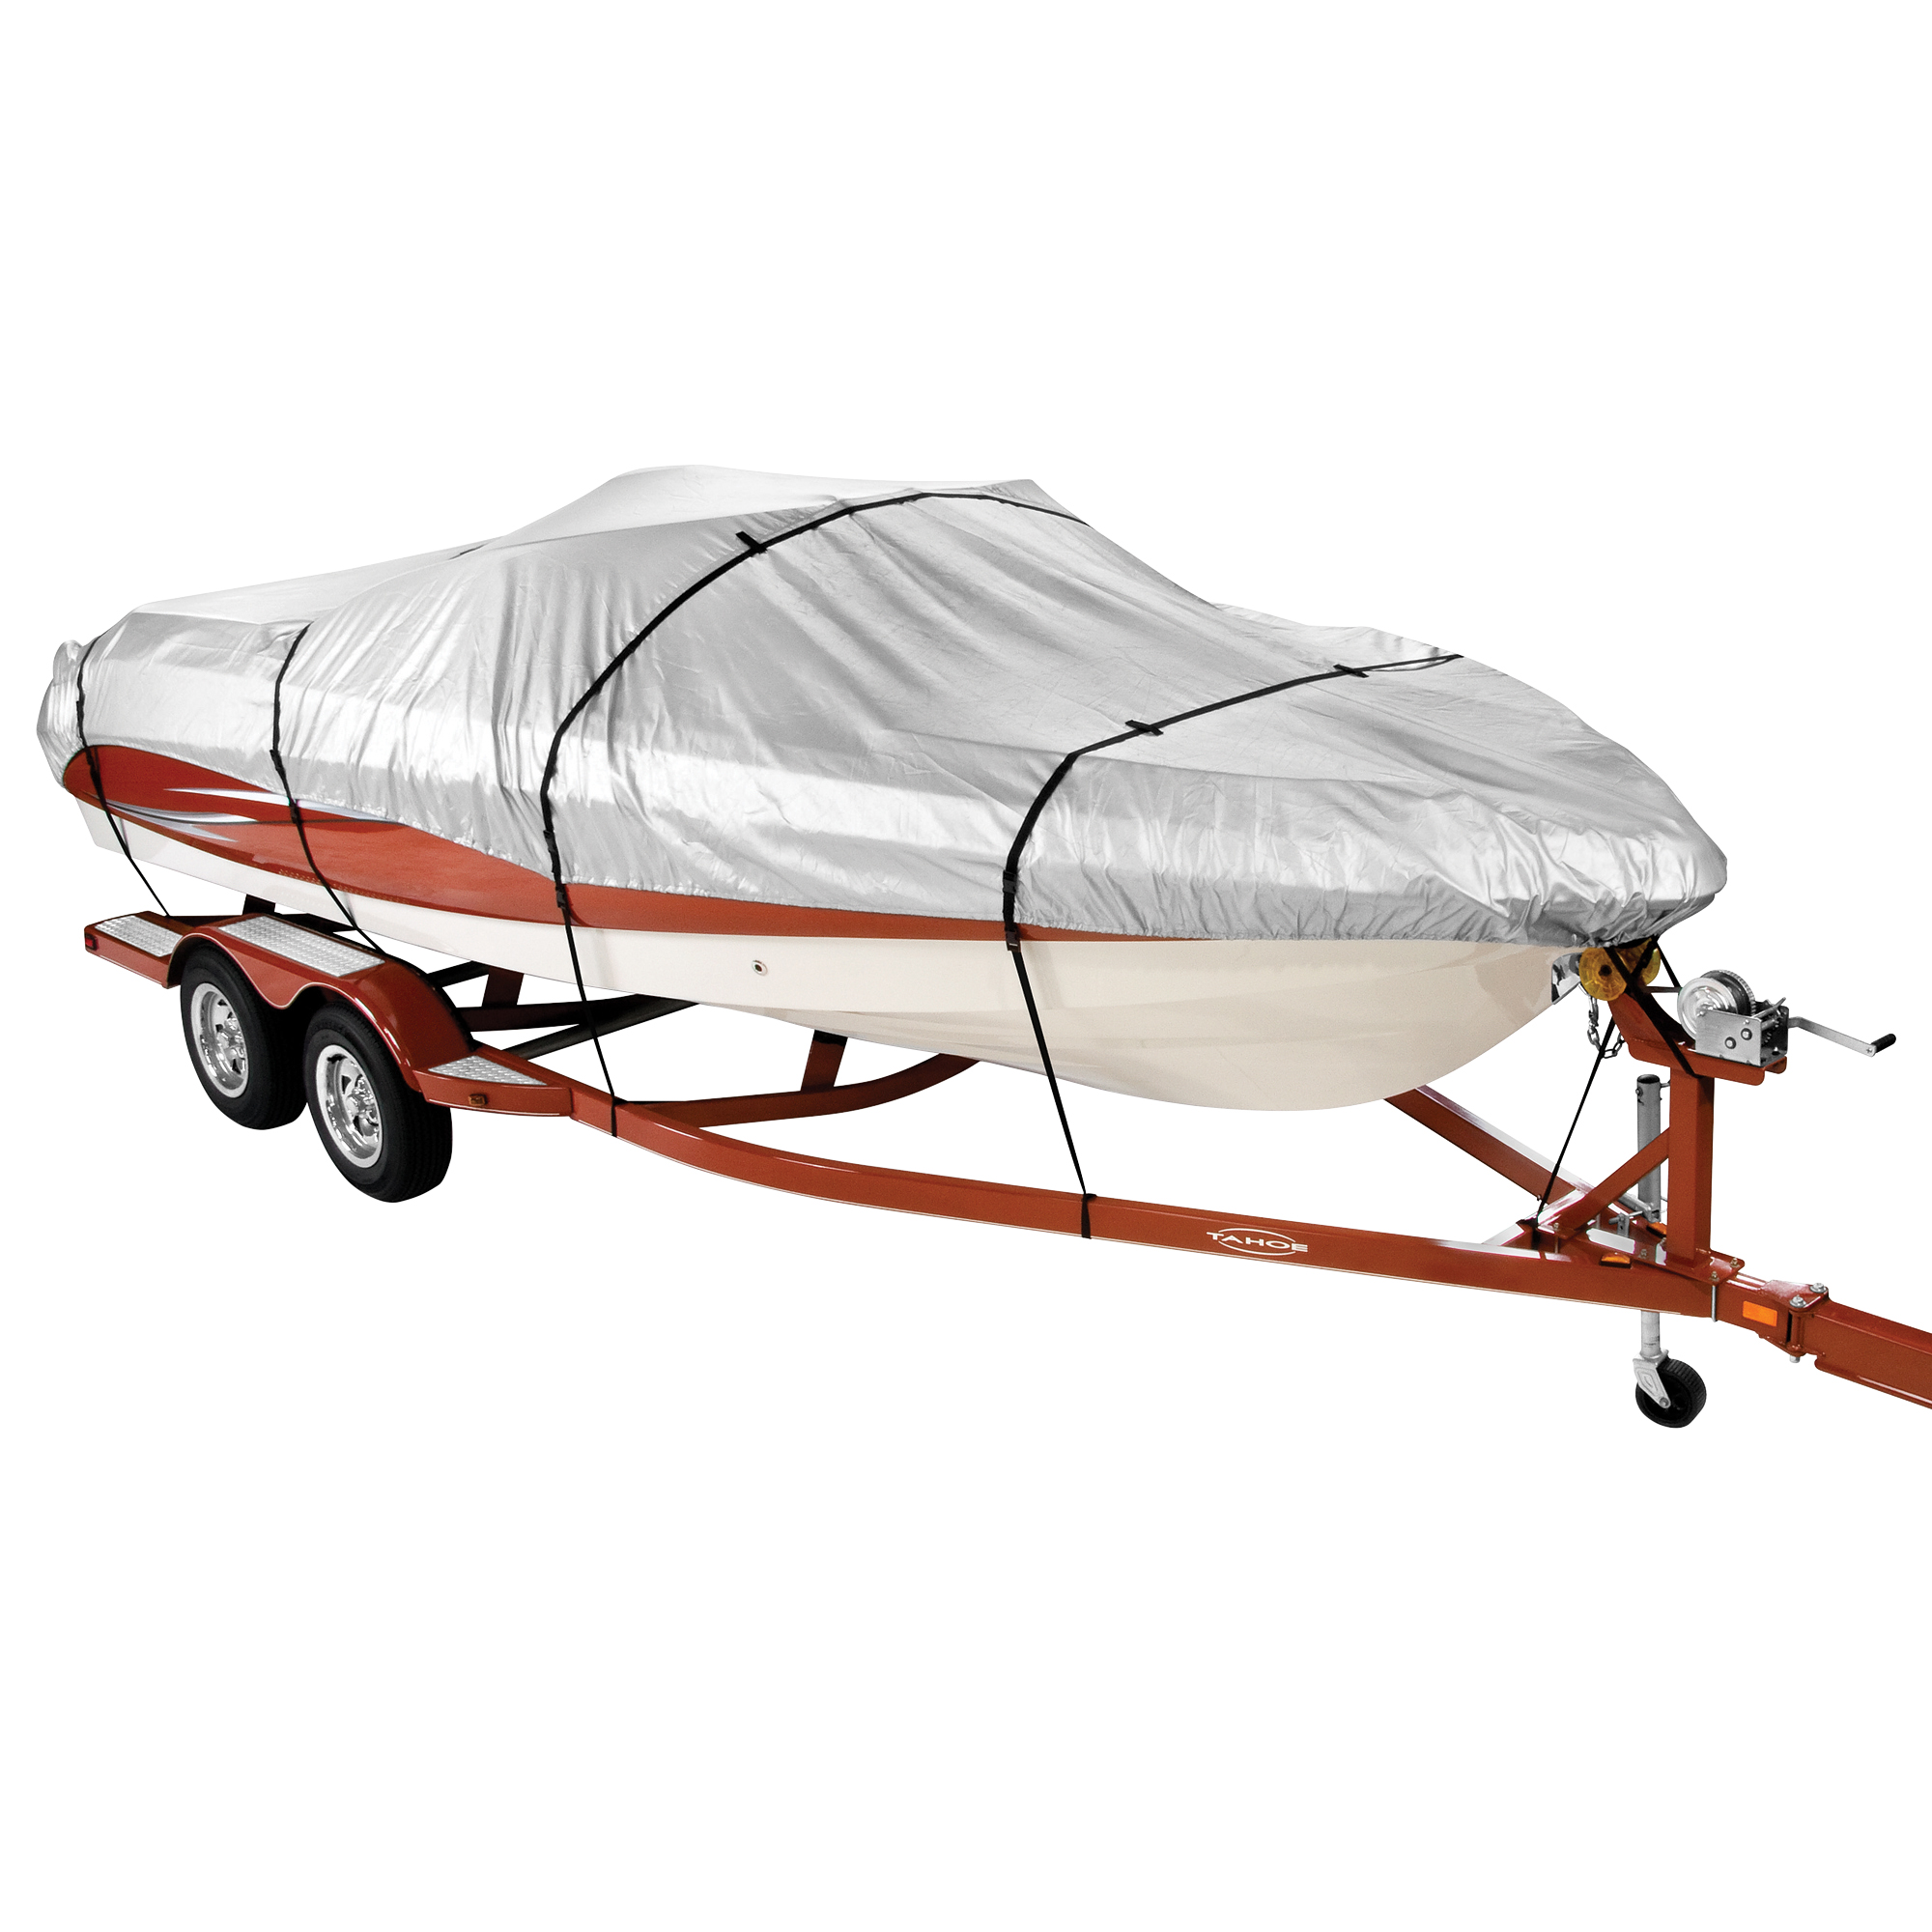 1988 WACO FISHING BOATS BMV16 16 FT Boat Covers: Free Shipping + Warranty  Included